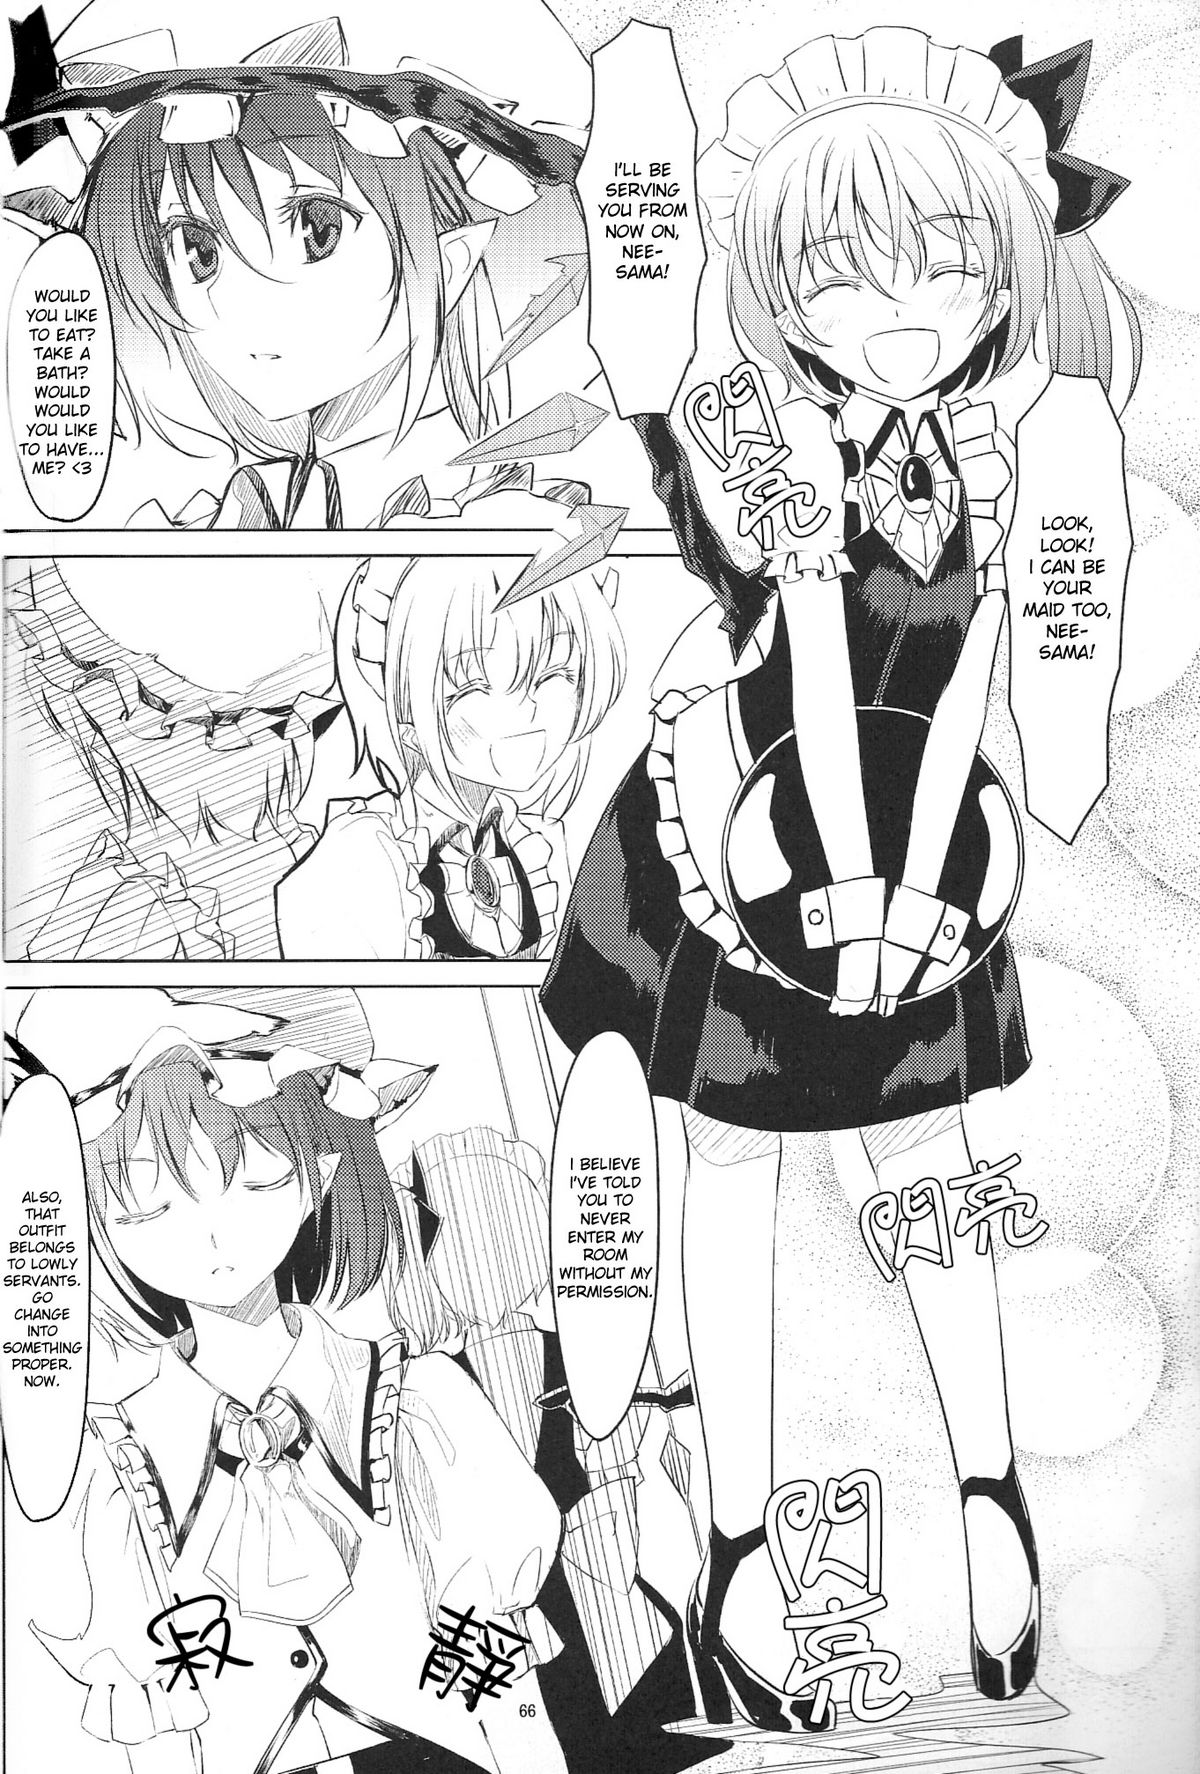 [telomereNA (Gustav)] S-2:Scarlet Sisters (Touhou Project) [English] [desudesu] [Incomplete] page 5 full